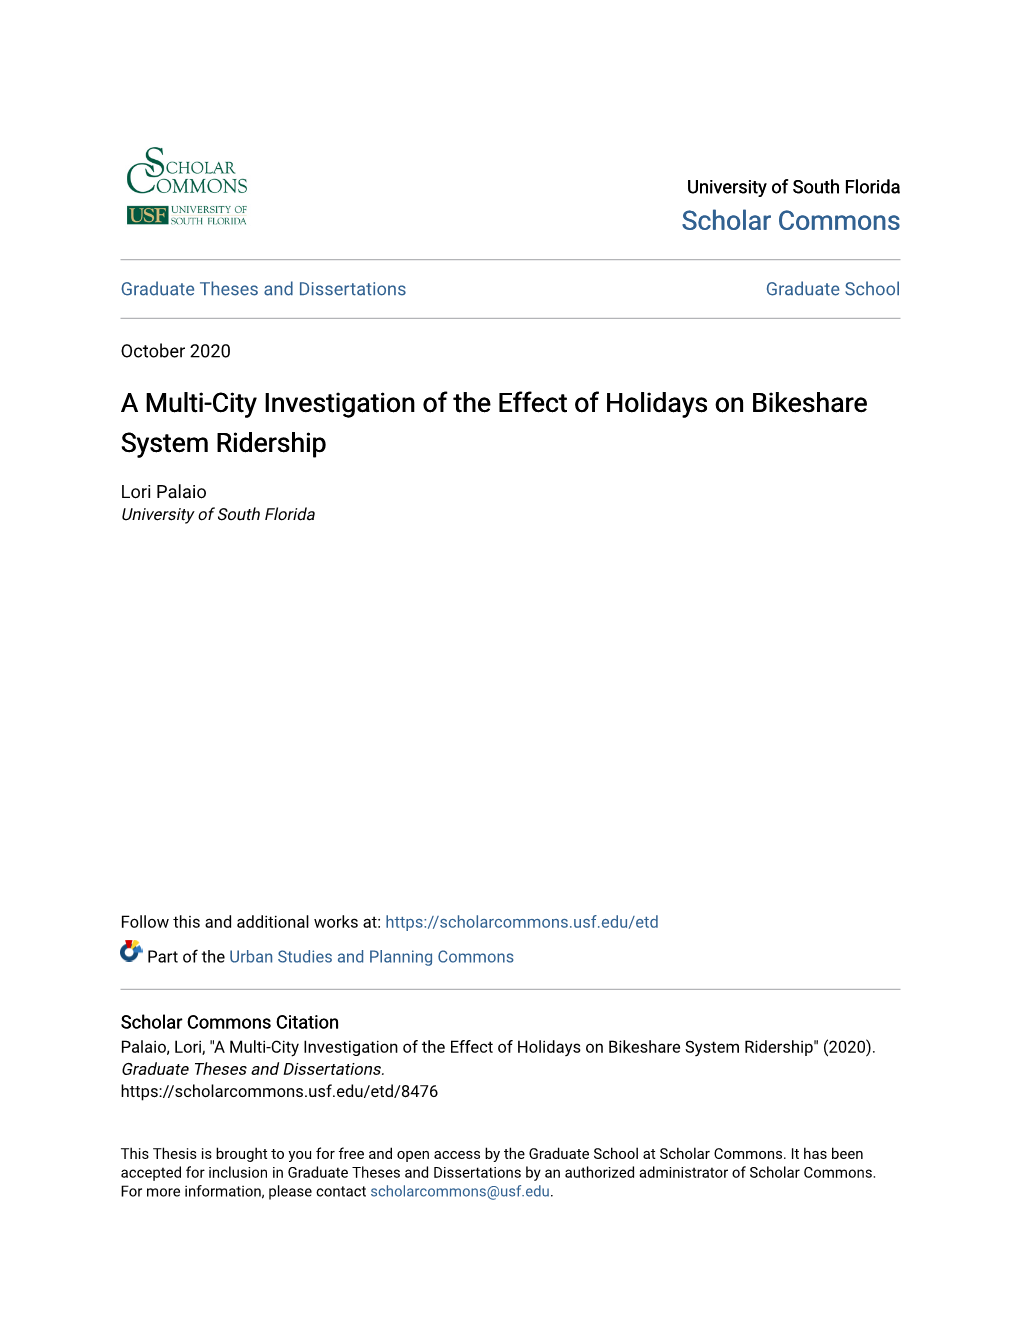 A Multi-City Investigation of the Effect of Holidays on Bikeshare System Ridership